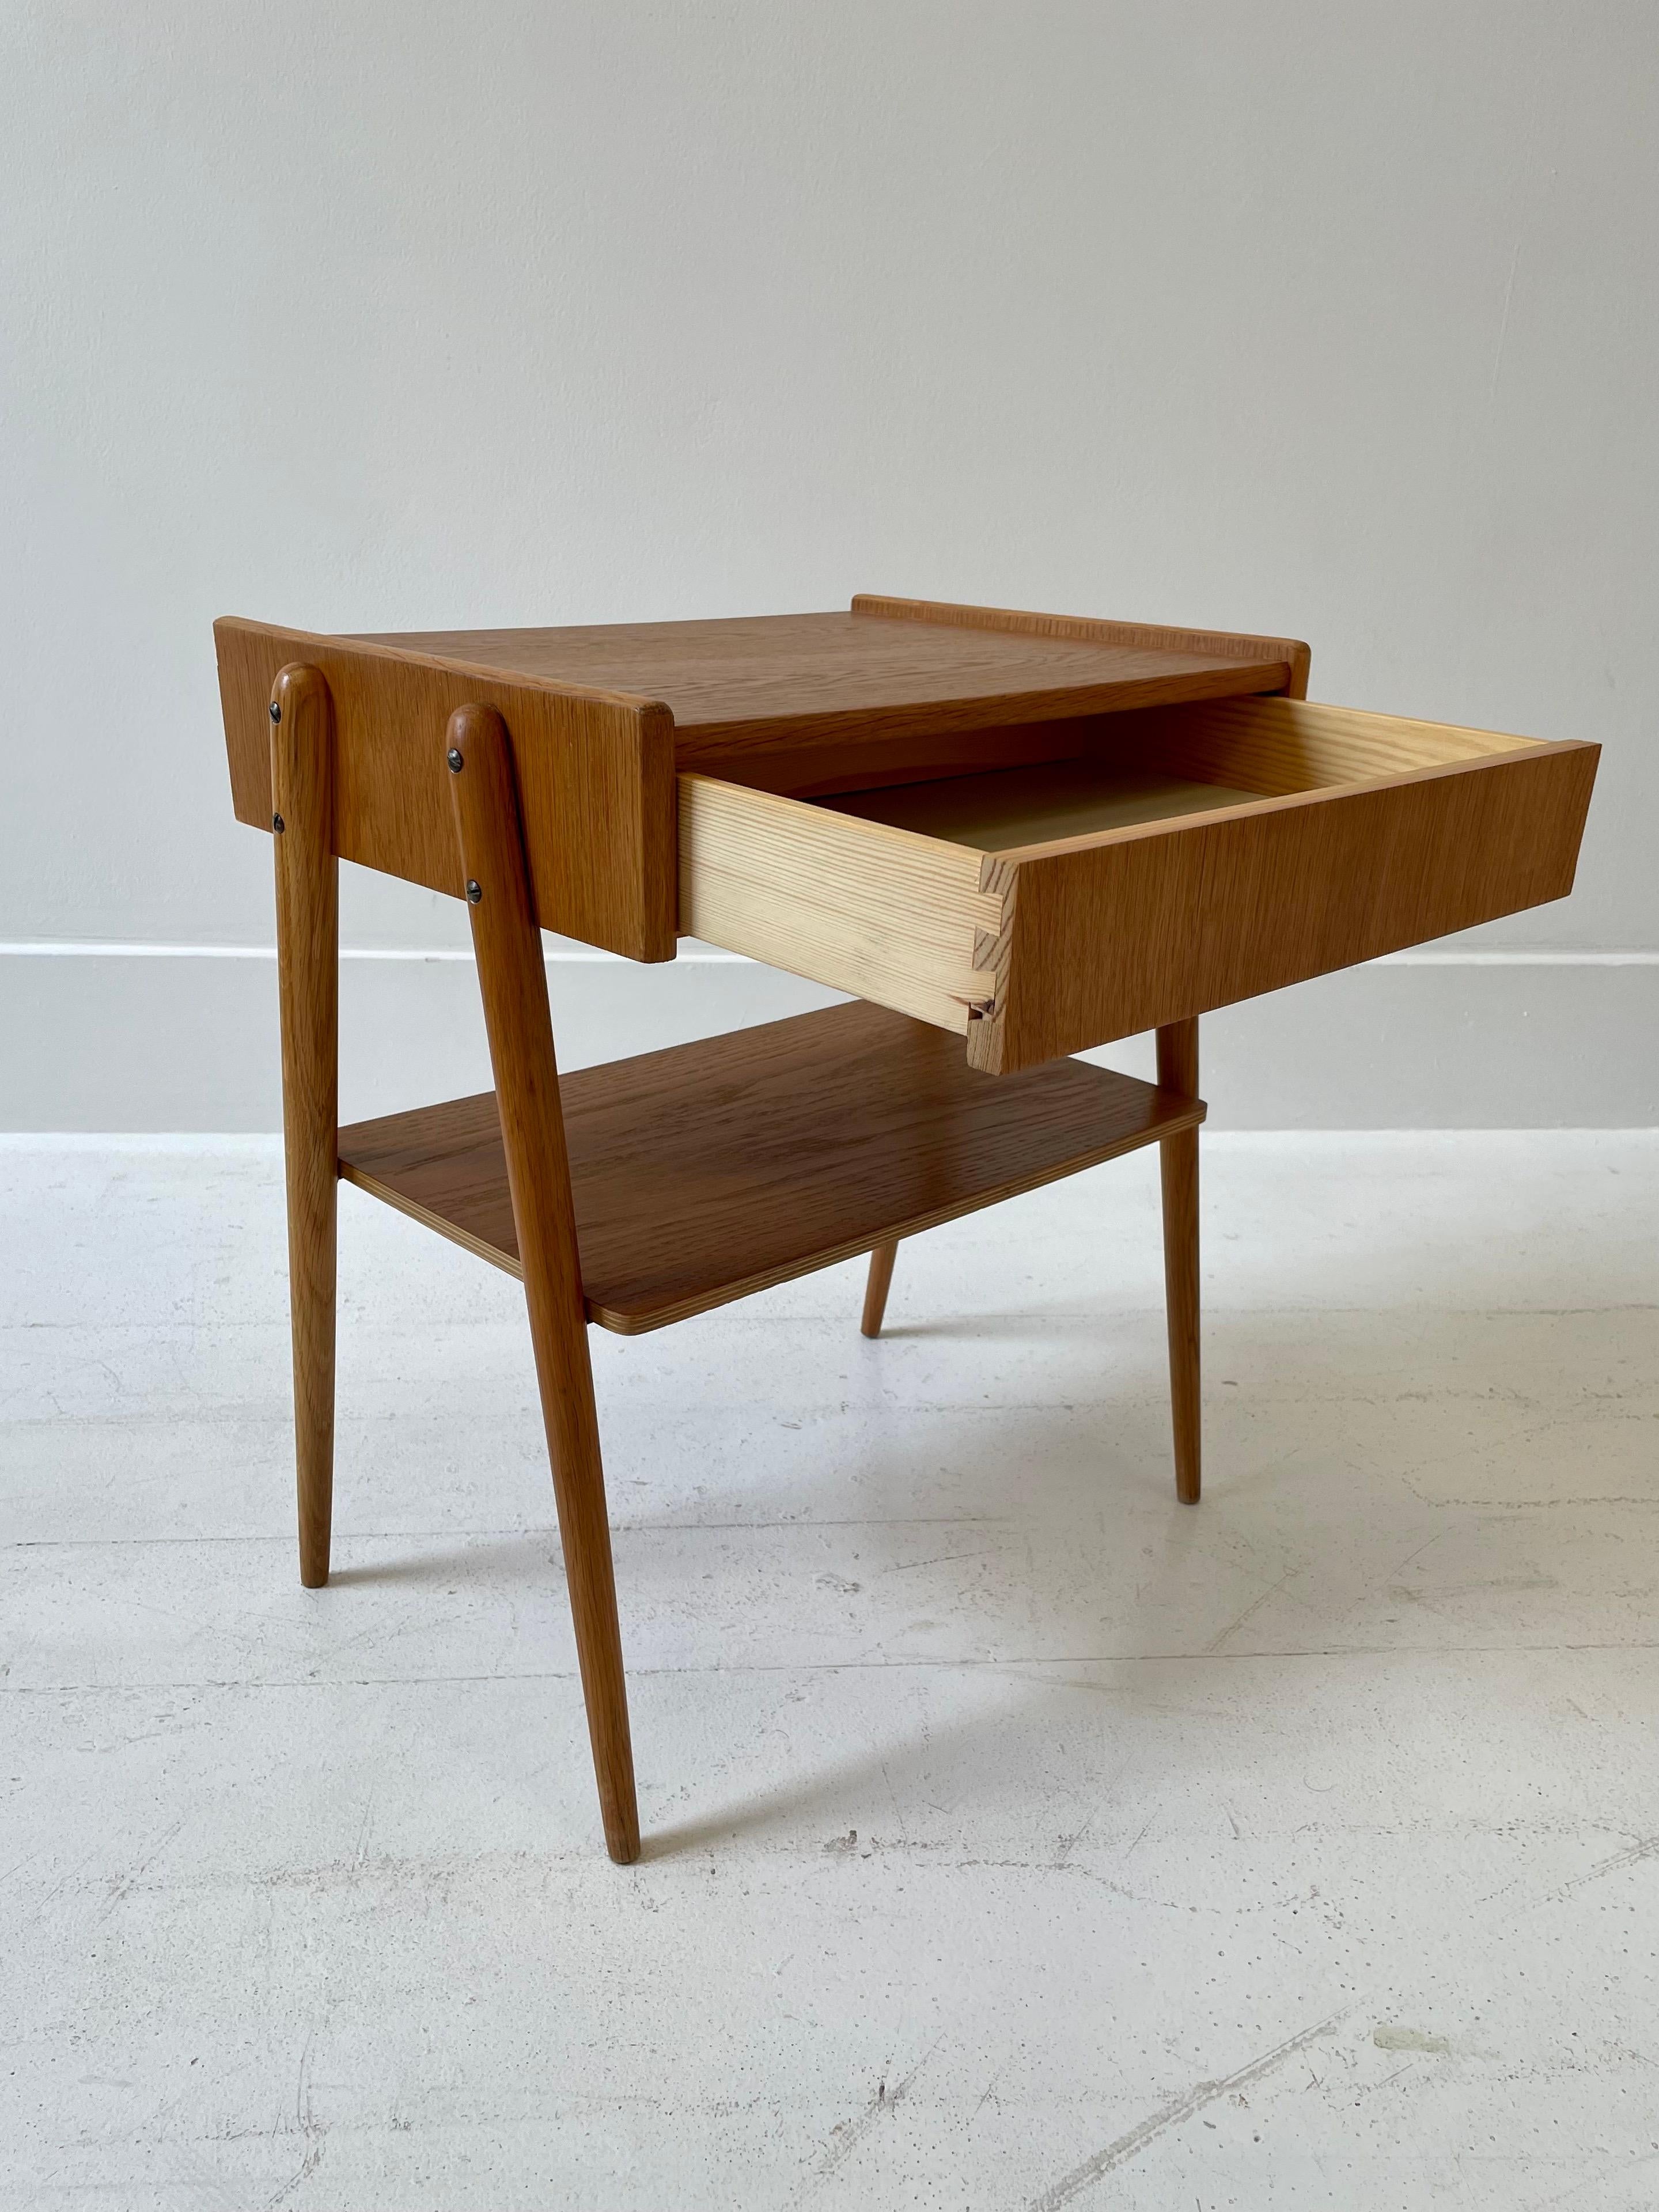 Pair of Teak Bedside Tables by MaCarlström & Co. Möbelfabrik, Finland In Good Condition For Sale In London, England